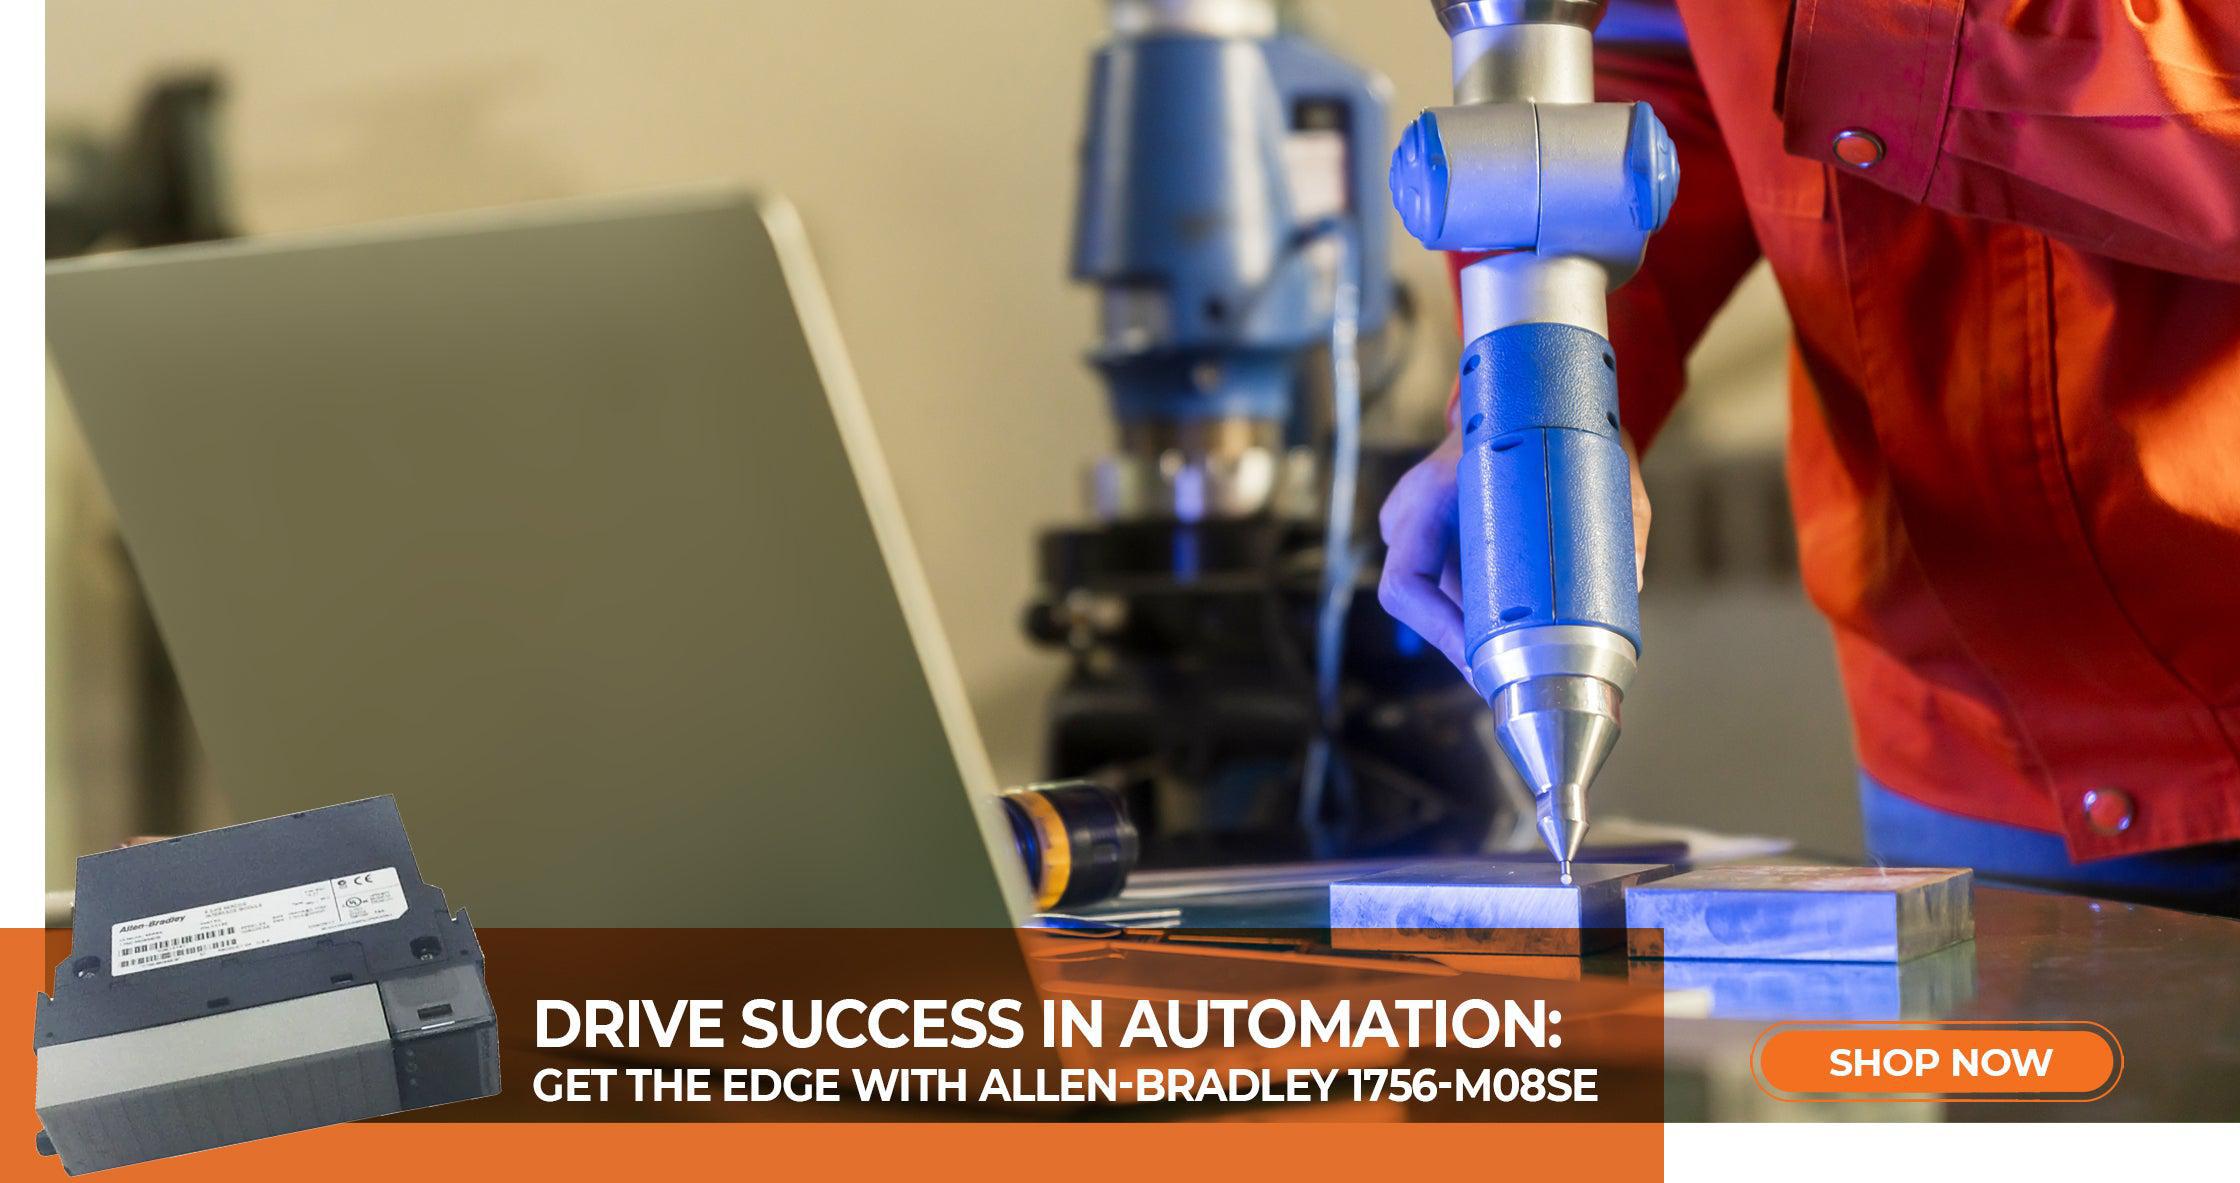 Automation specialist operating a precision robotic arm controlled by Allen-Bradley 1756-M08SE for advanced manufacturing tasks.